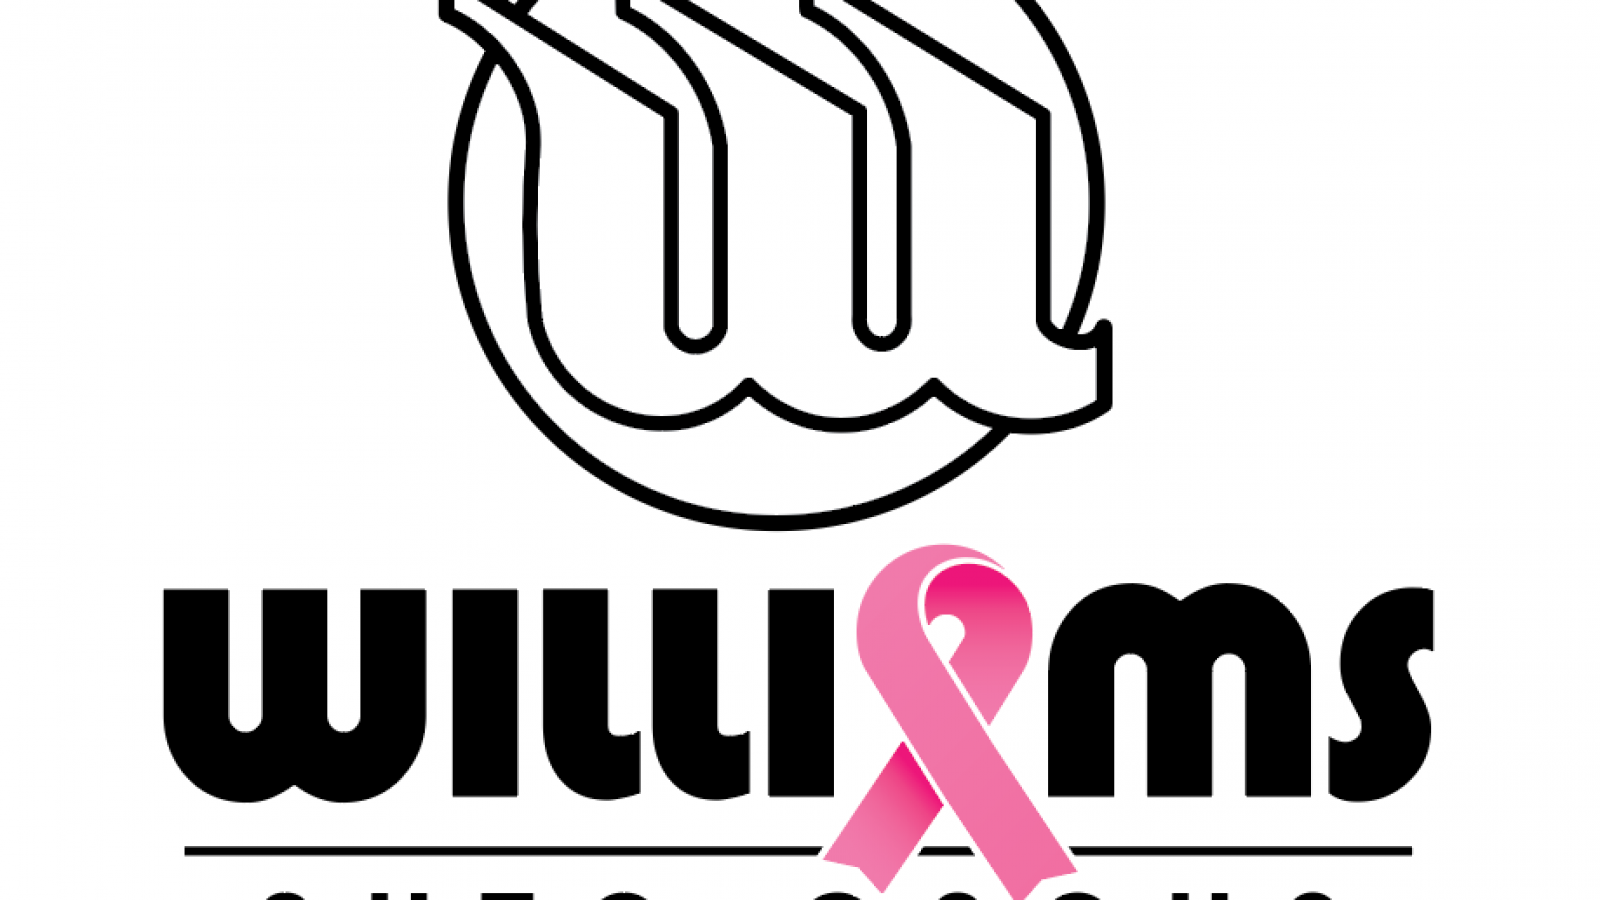 Williams Auto Group "Drive Pink" Supports Guthrie Breast Care Fund